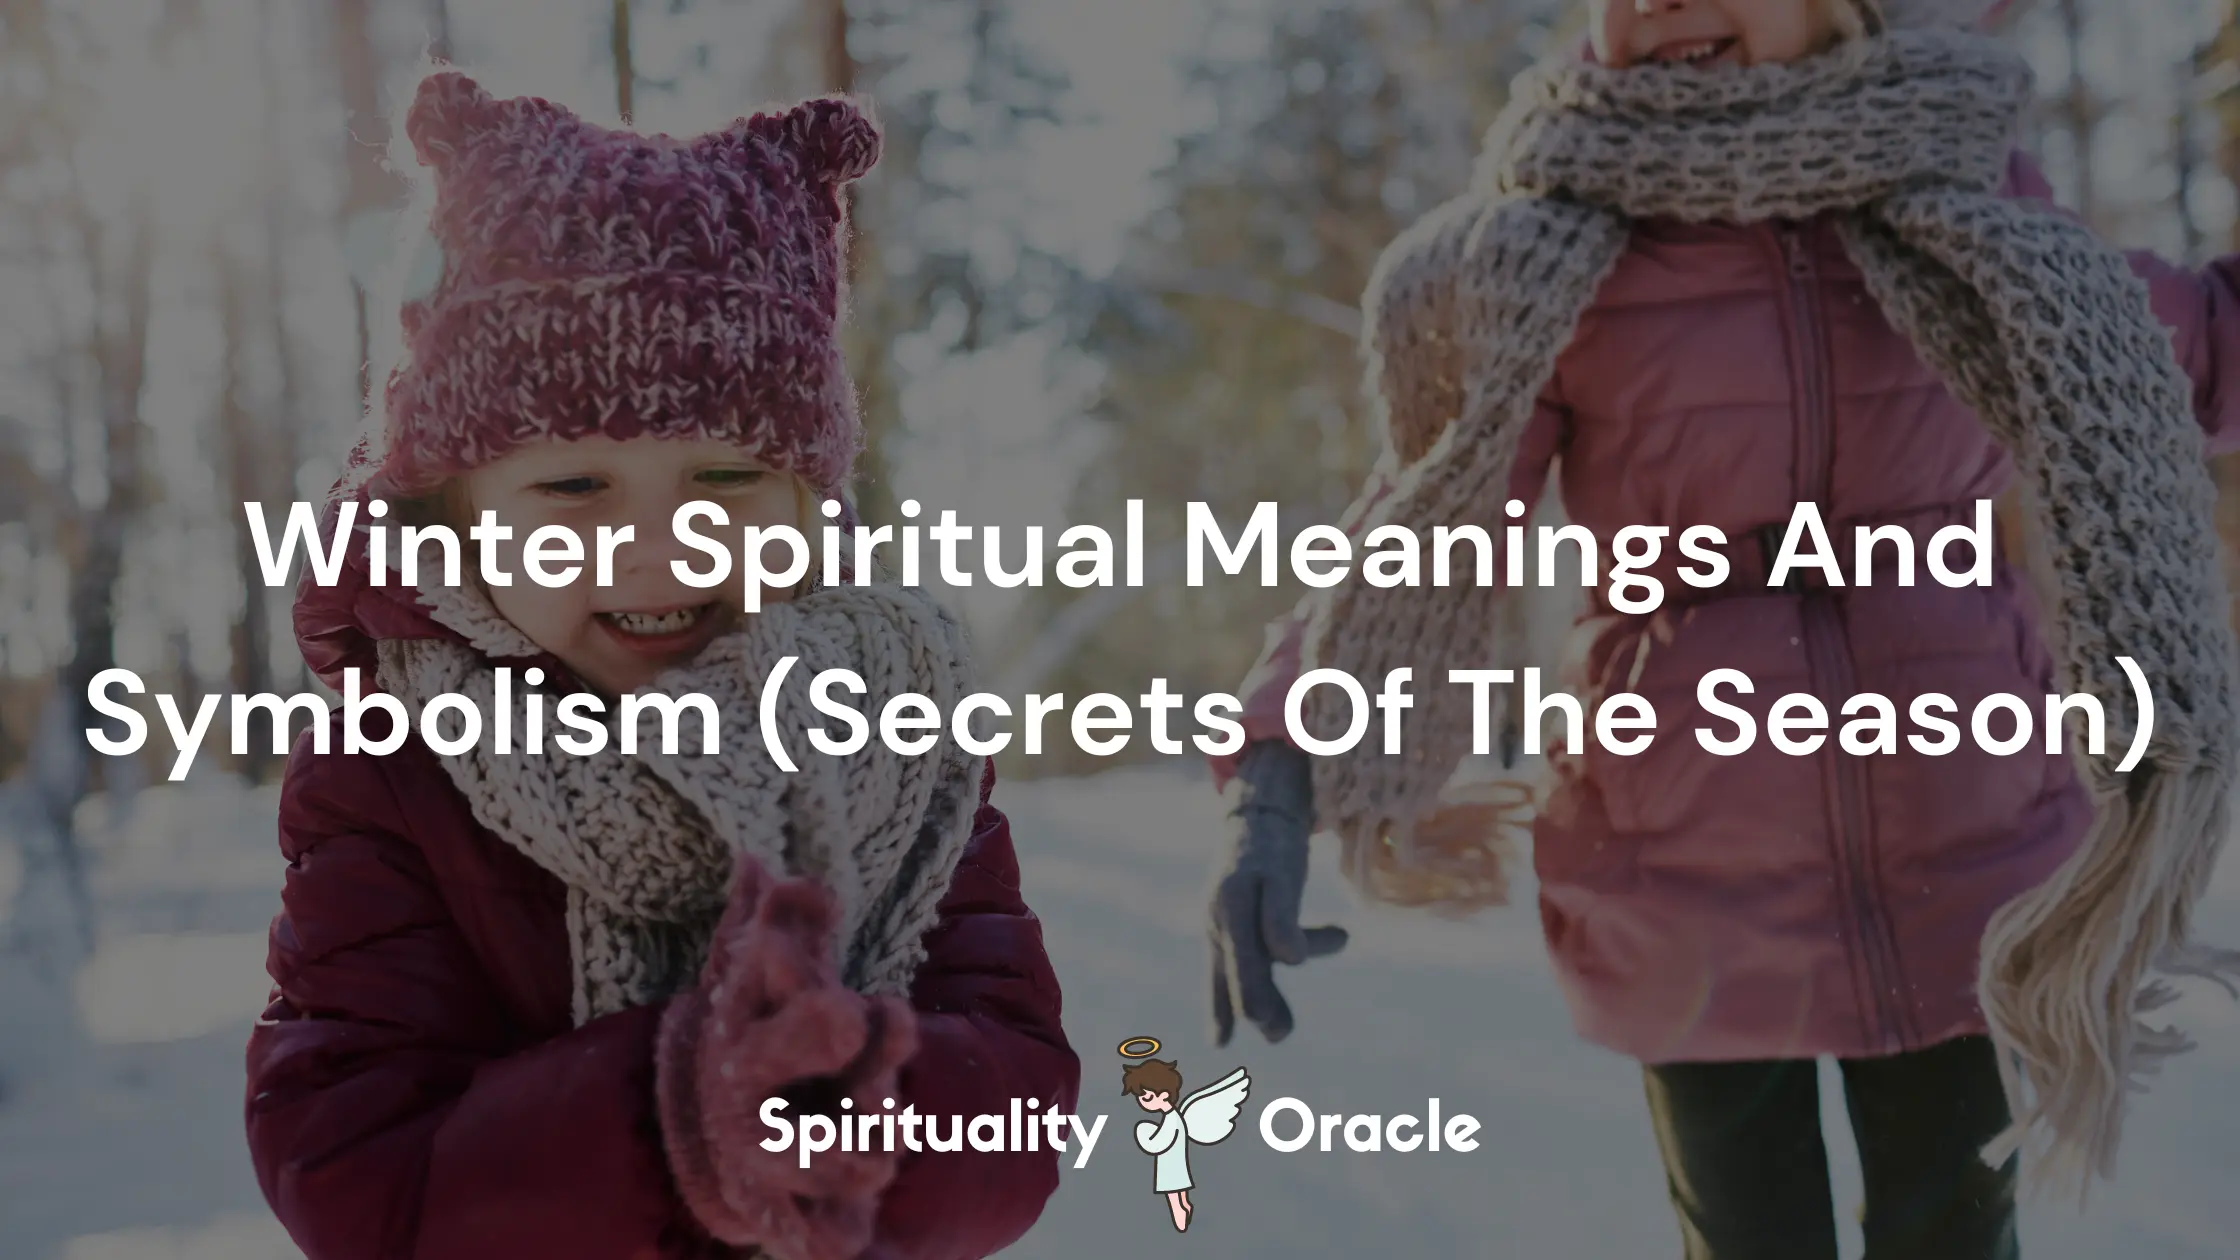 Winter Spiritual Meanings And Symbolism (Secrets Of The Season)